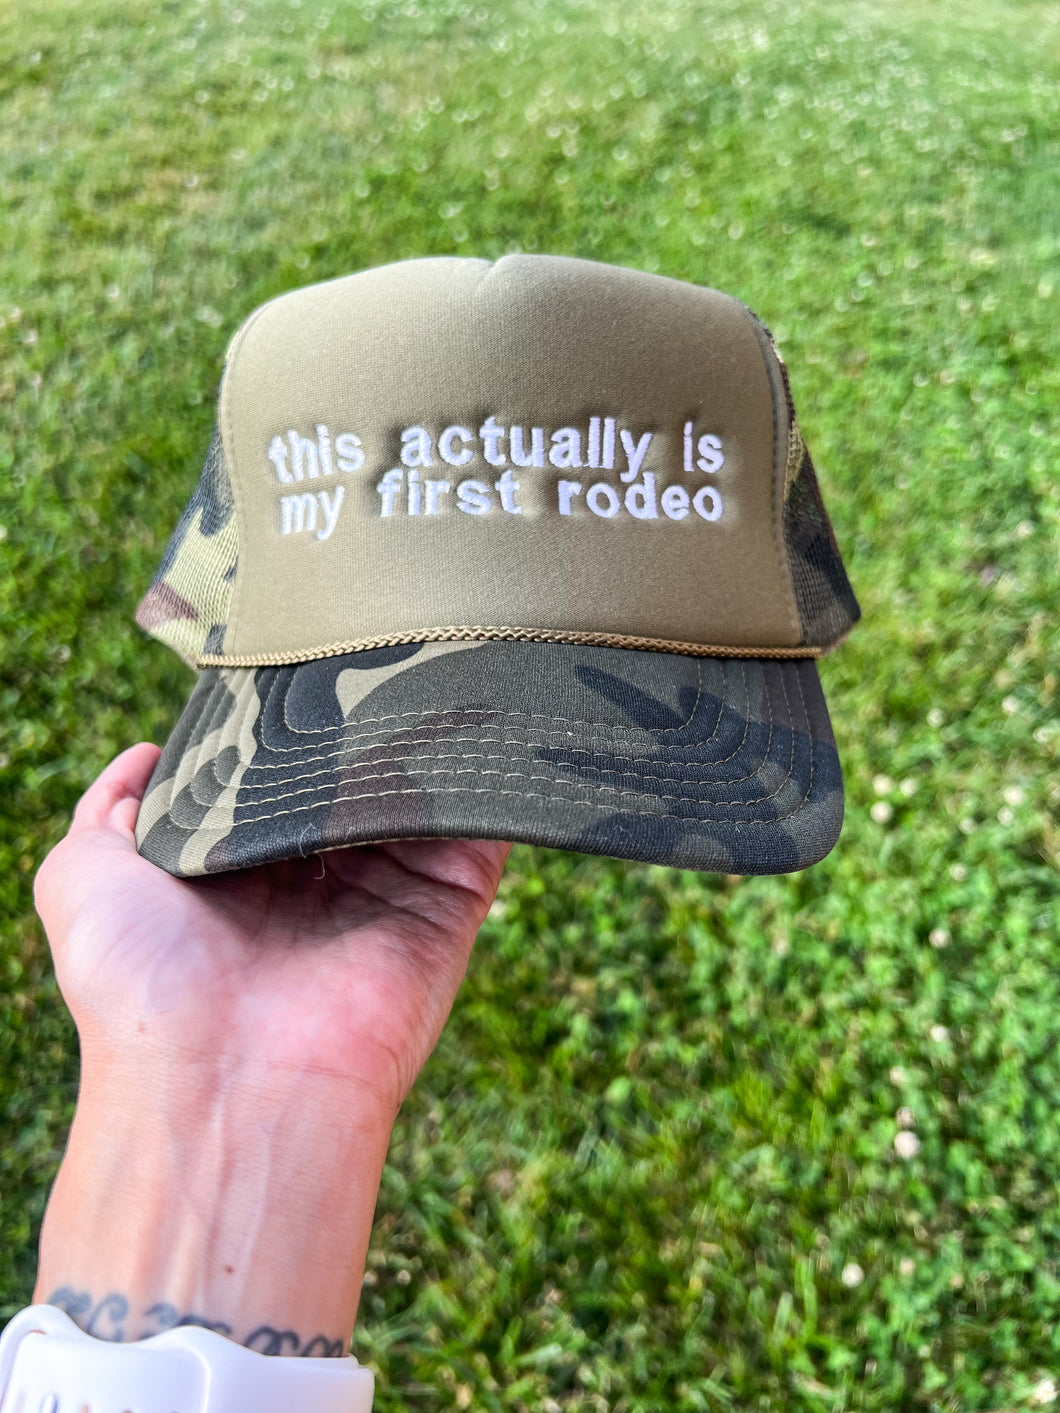 This Actually Is My First Rodeo Trucker Hat